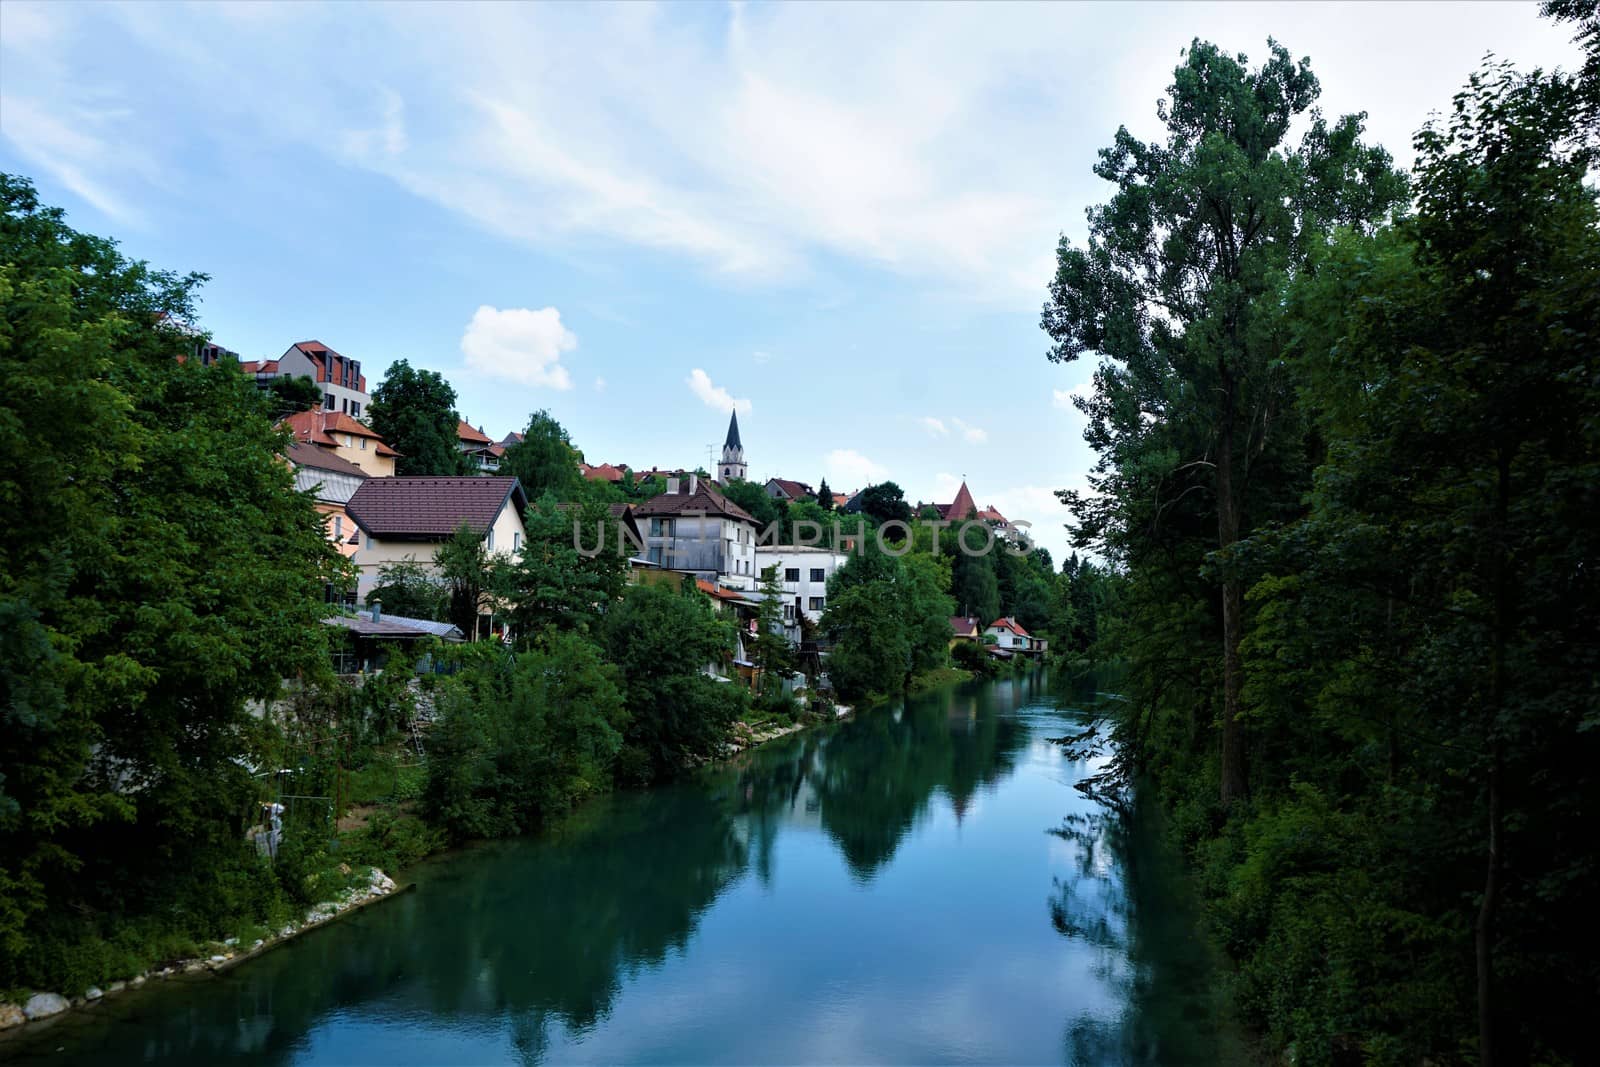 The Sava river and the city of Kranj by pisces2386